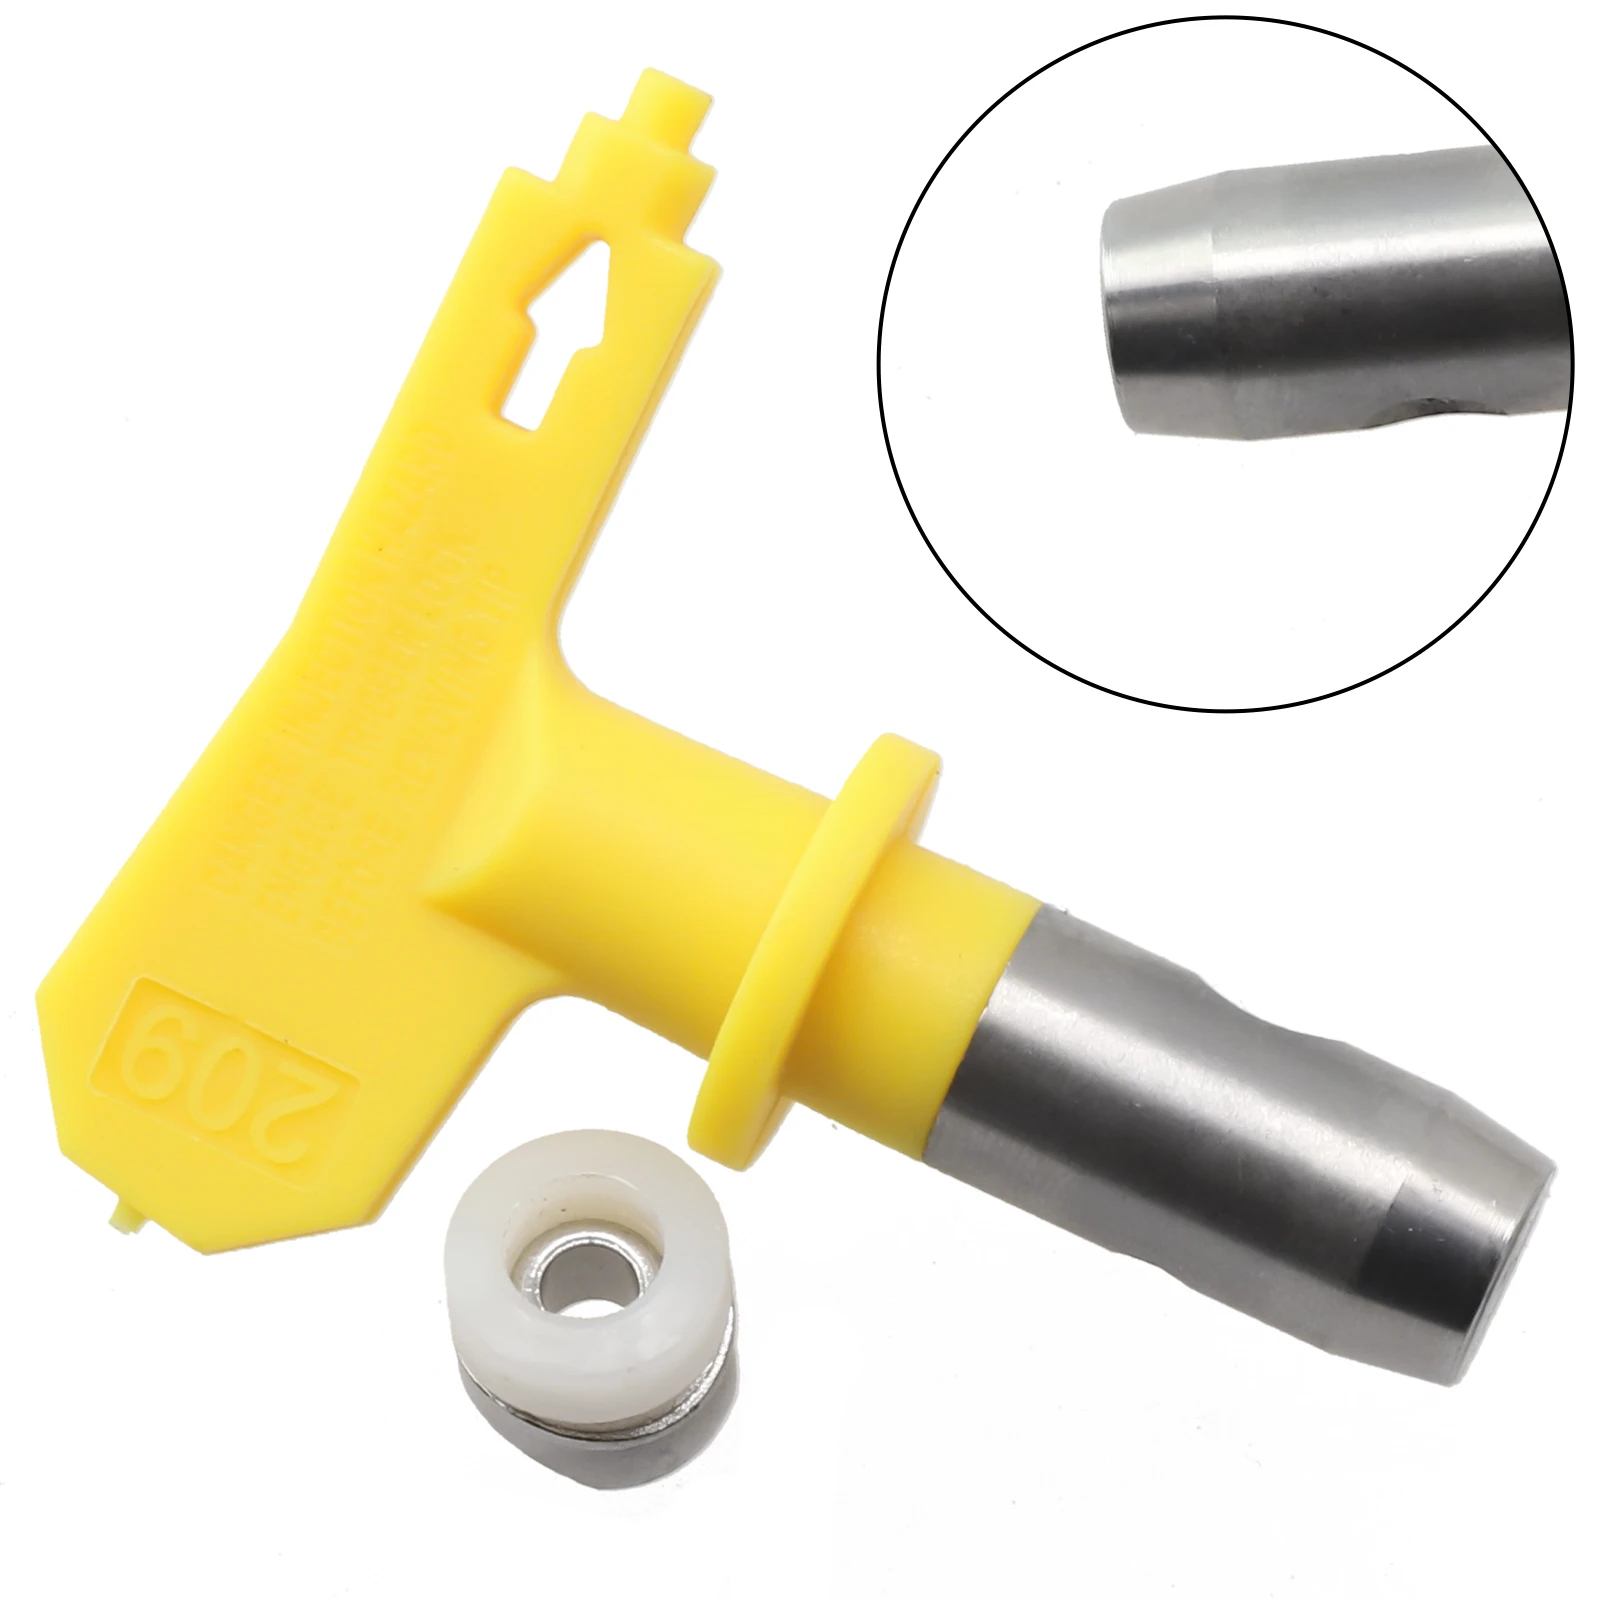 MTB Home Nozzle Paint Spray Sprayer Tip Tools Universal Wagner Airless For Replacement Sports Bike Parts Bicycle